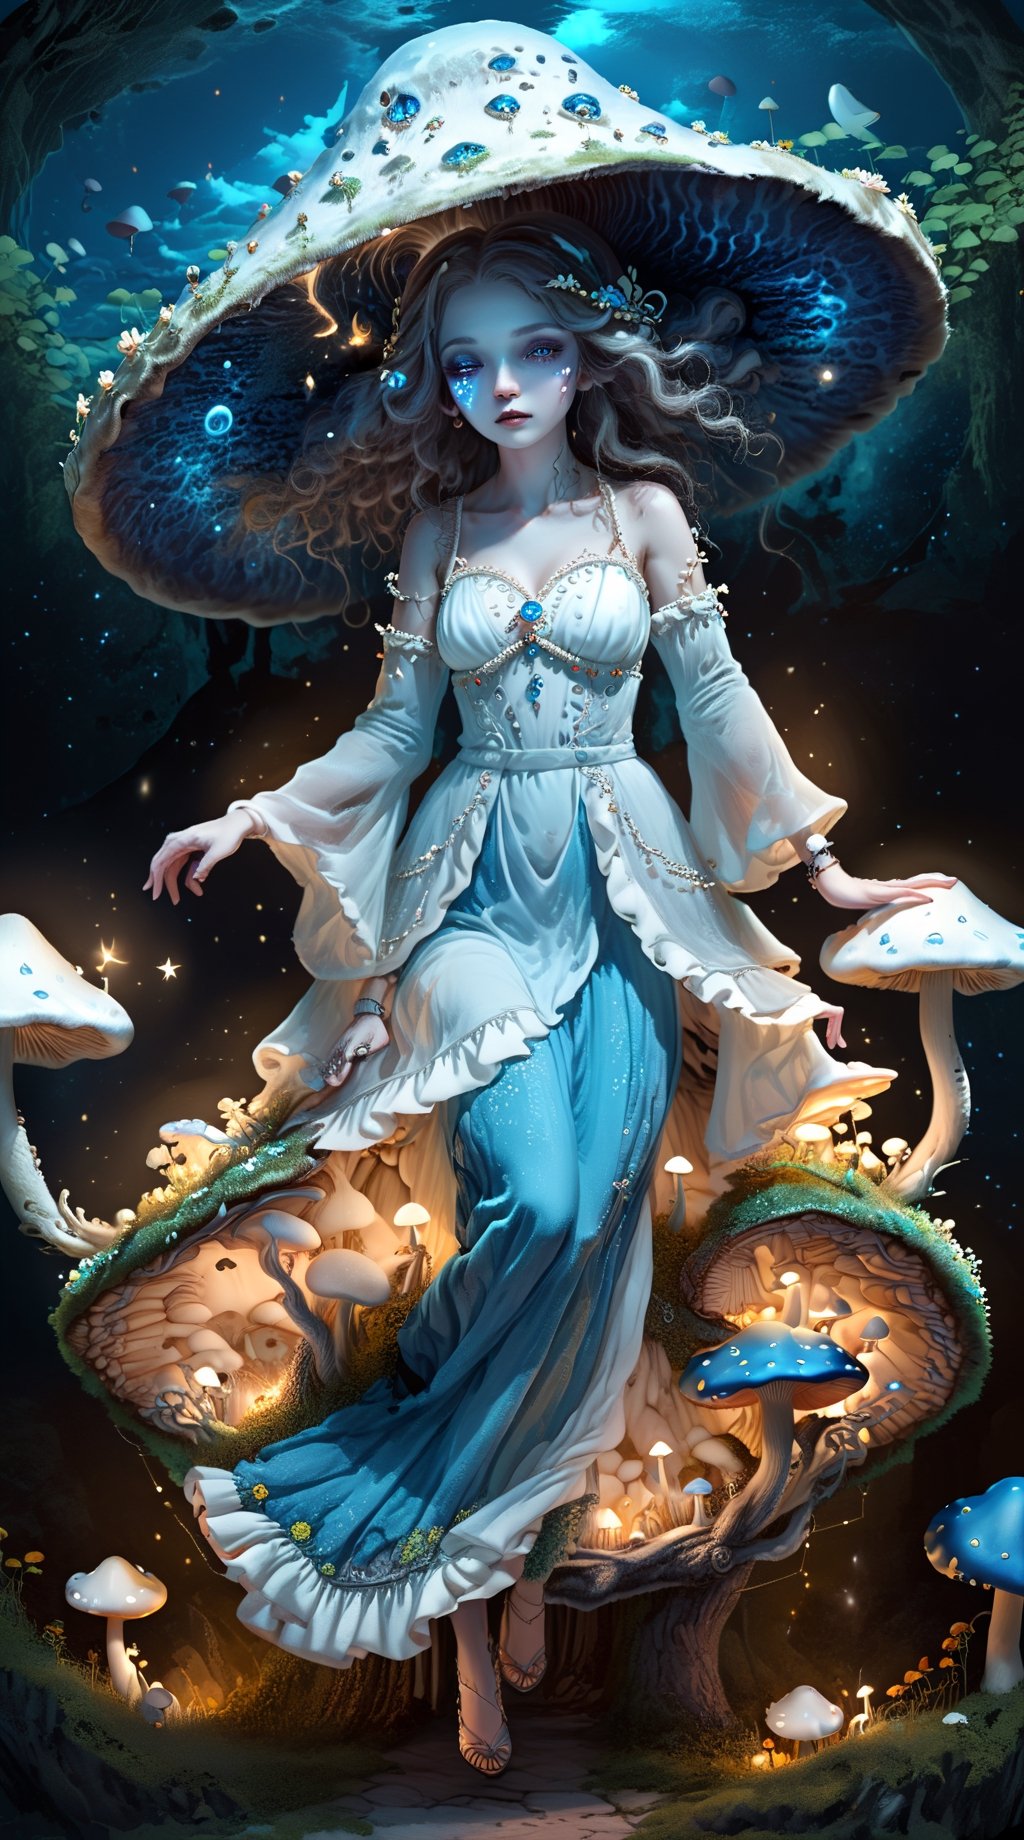 IncrsXLRanni, Fantasy, surreal, 1girl, dynamic pose, (blue skin:1.4), flow curly hair, white dress is made of a soft and silky fabric, flows on the body, cyan&white color, sweetheart neckline, a flared skirt reaches the floor, adorned skirt by intricate embellishments of floral patterns, stars, and crescent moons, (doll joints), Made of beads, sequins, crystals, (cyan glow mushrooms:1.2), and pearls that sparkling), has a veil and hat which also has floral, star, and moon motifs that complement the dress. Neon glow accesorized dress, Combination of fashionable and fantasy, creative, Hyperdetailed artwork,IncrsXLRanni,wavy hair, blue skin, cracked skin,girl,DonShr00mXL 